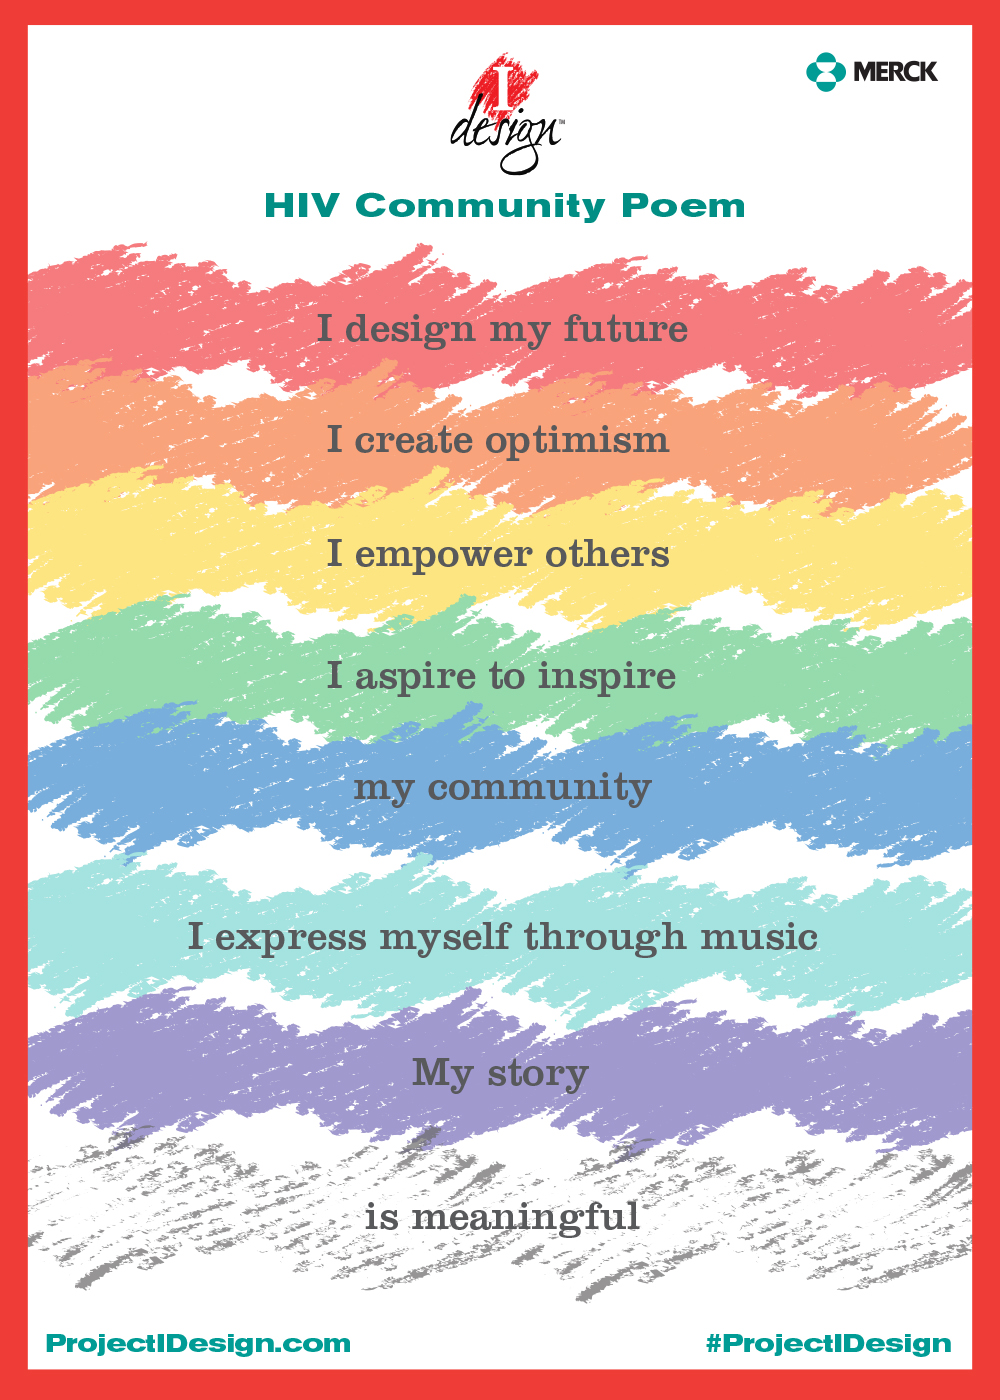 Members of the HIV Community chose their own words to individualize an I Design poem; most commonly used words were amassed to create an overall Community poem reflective of their collective voices.